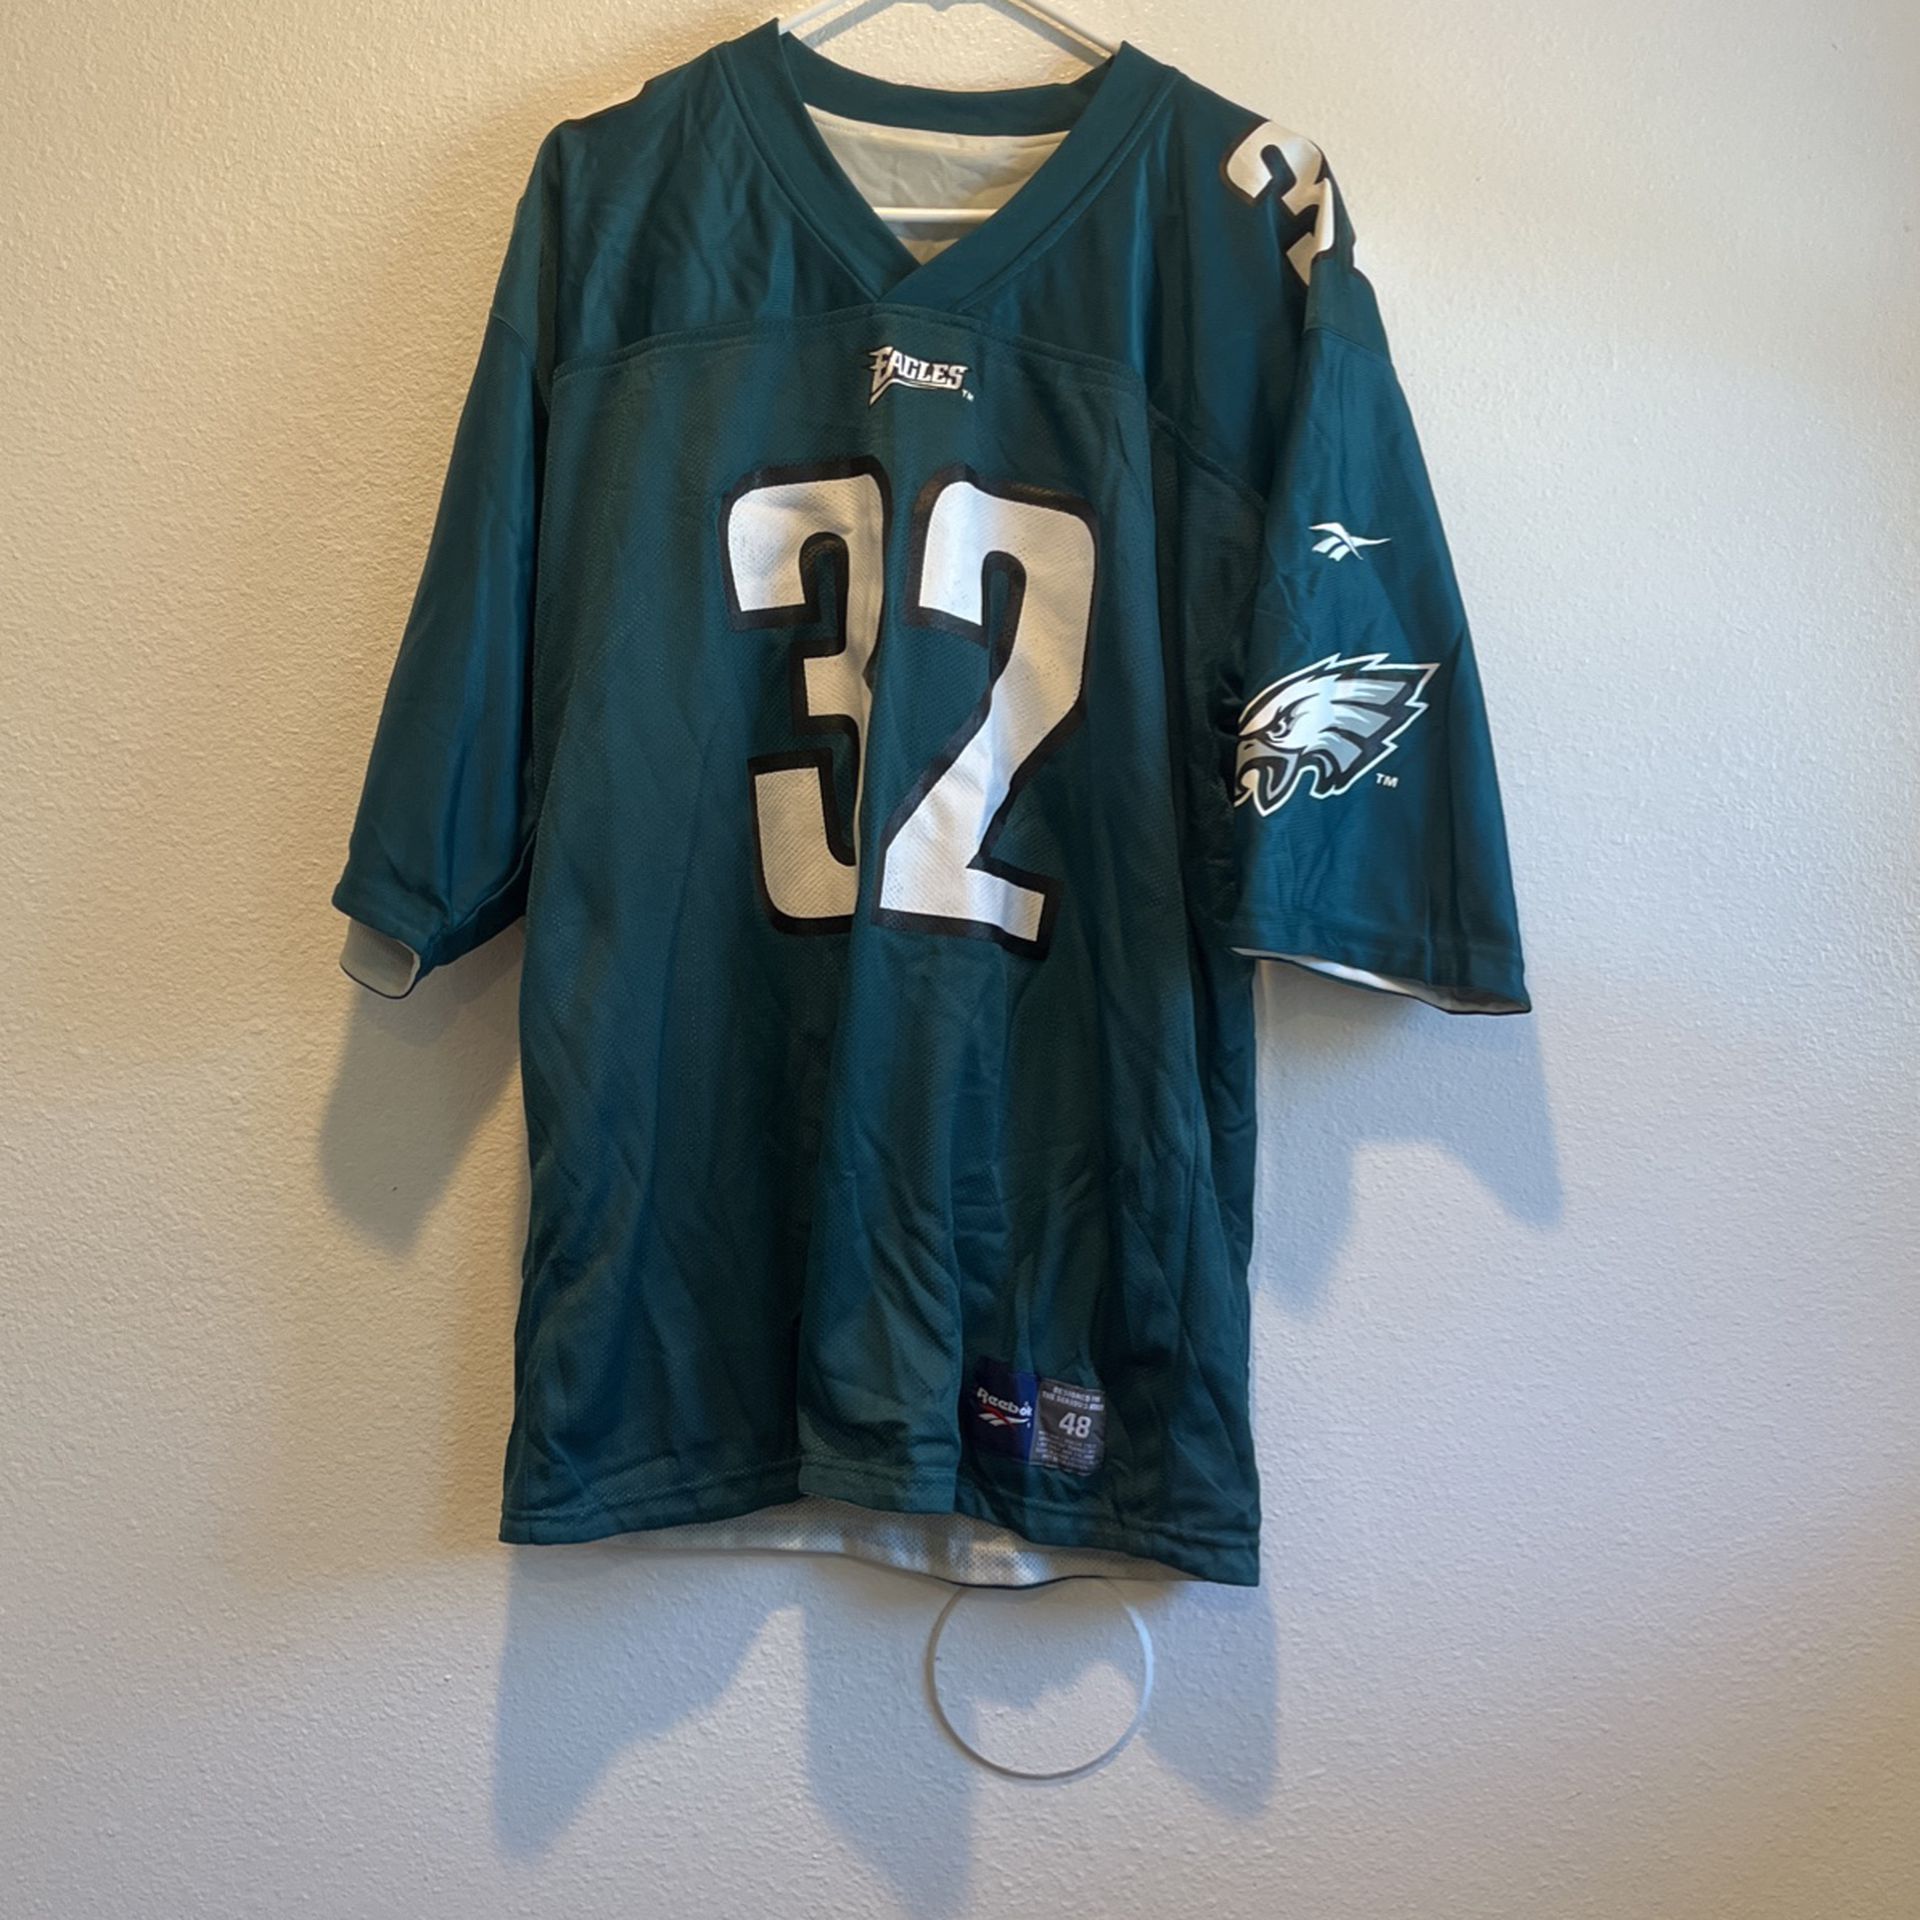 eagle jersey for sale